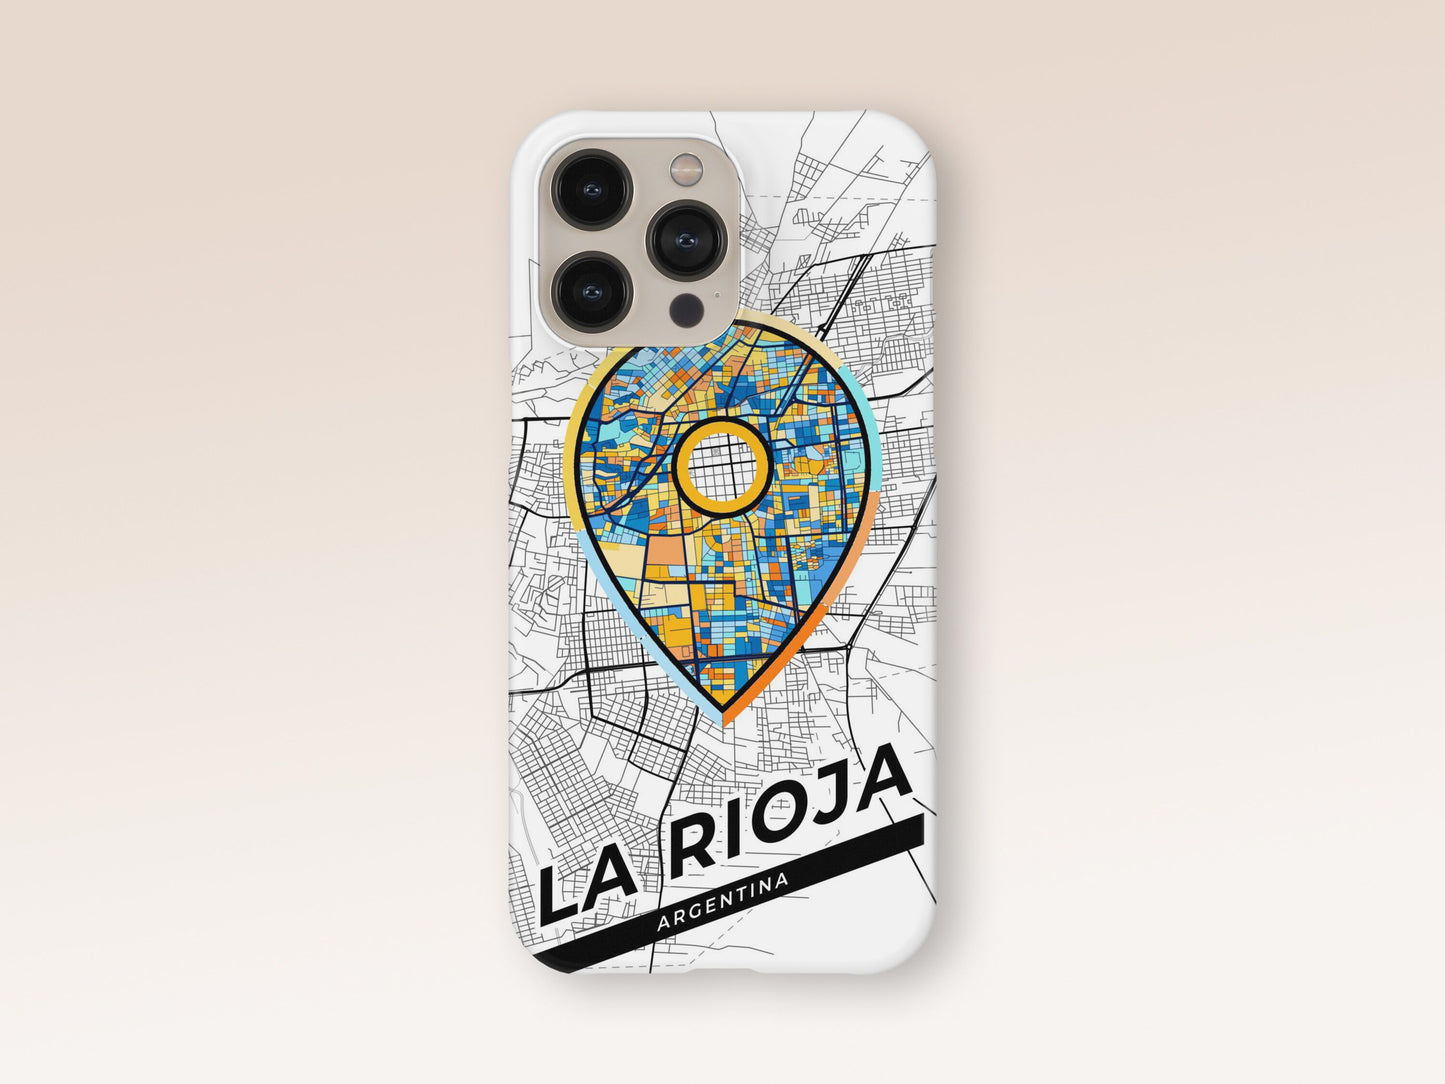 La Rioja Argentina slim phone case with colorful icon. Birthday, wedding or housewarming gift. Couple match cases. 1